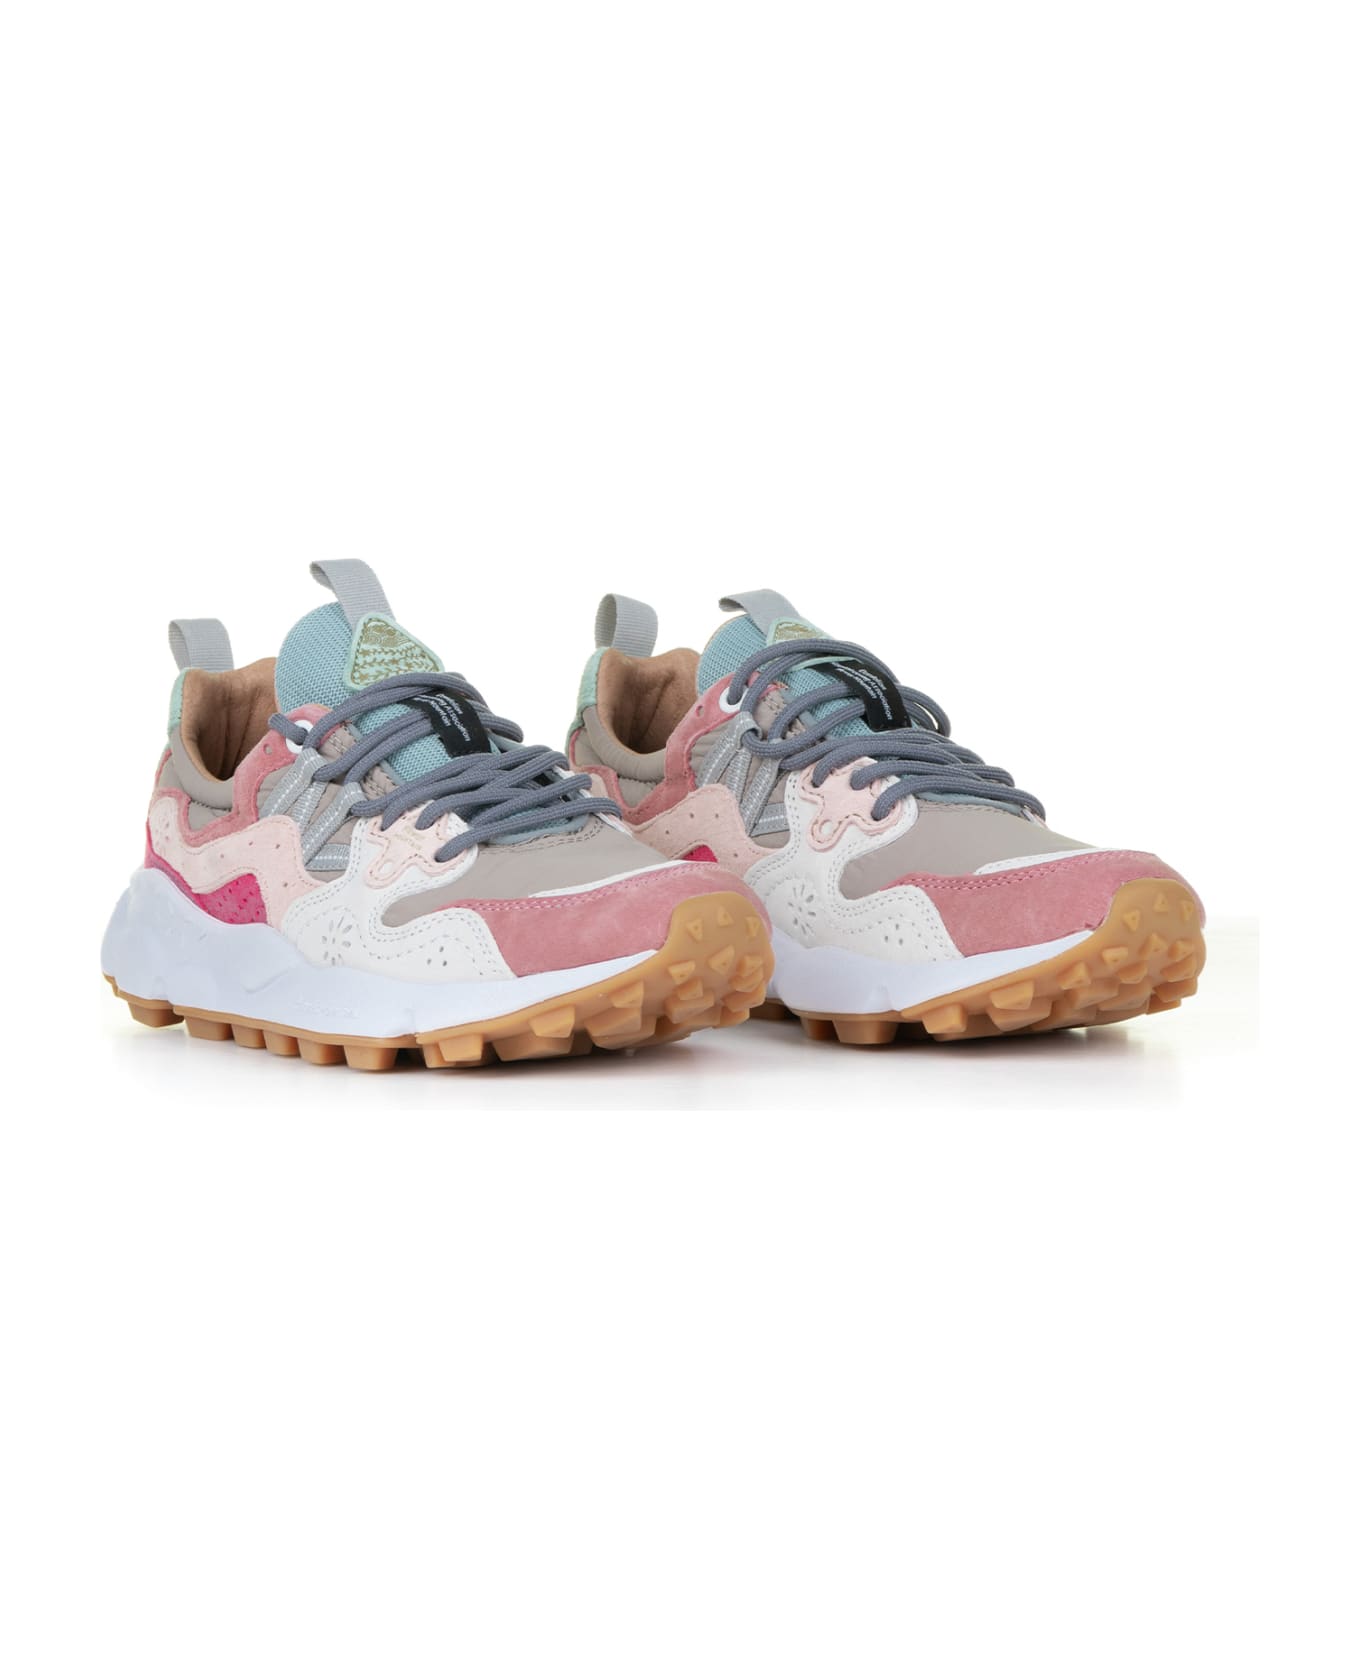 Flower Mountain Yamano Pink Suede And Nylon Sneakers - CIPRIA MULTI スニーカー